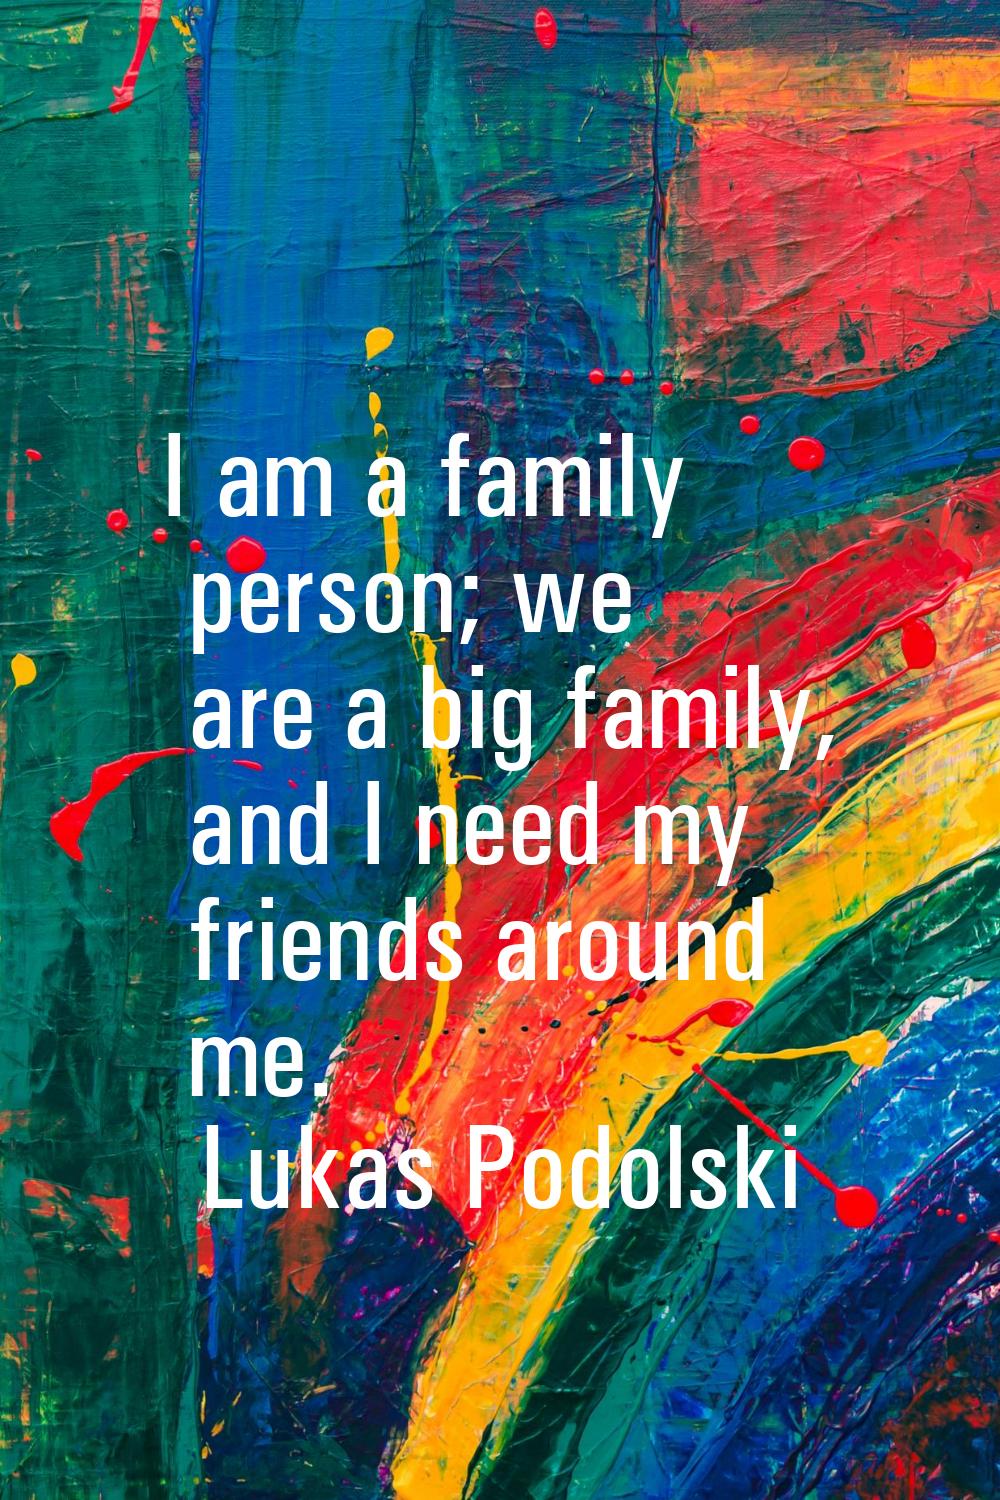 I am a family person; we are a big family, and I need my friends around me.